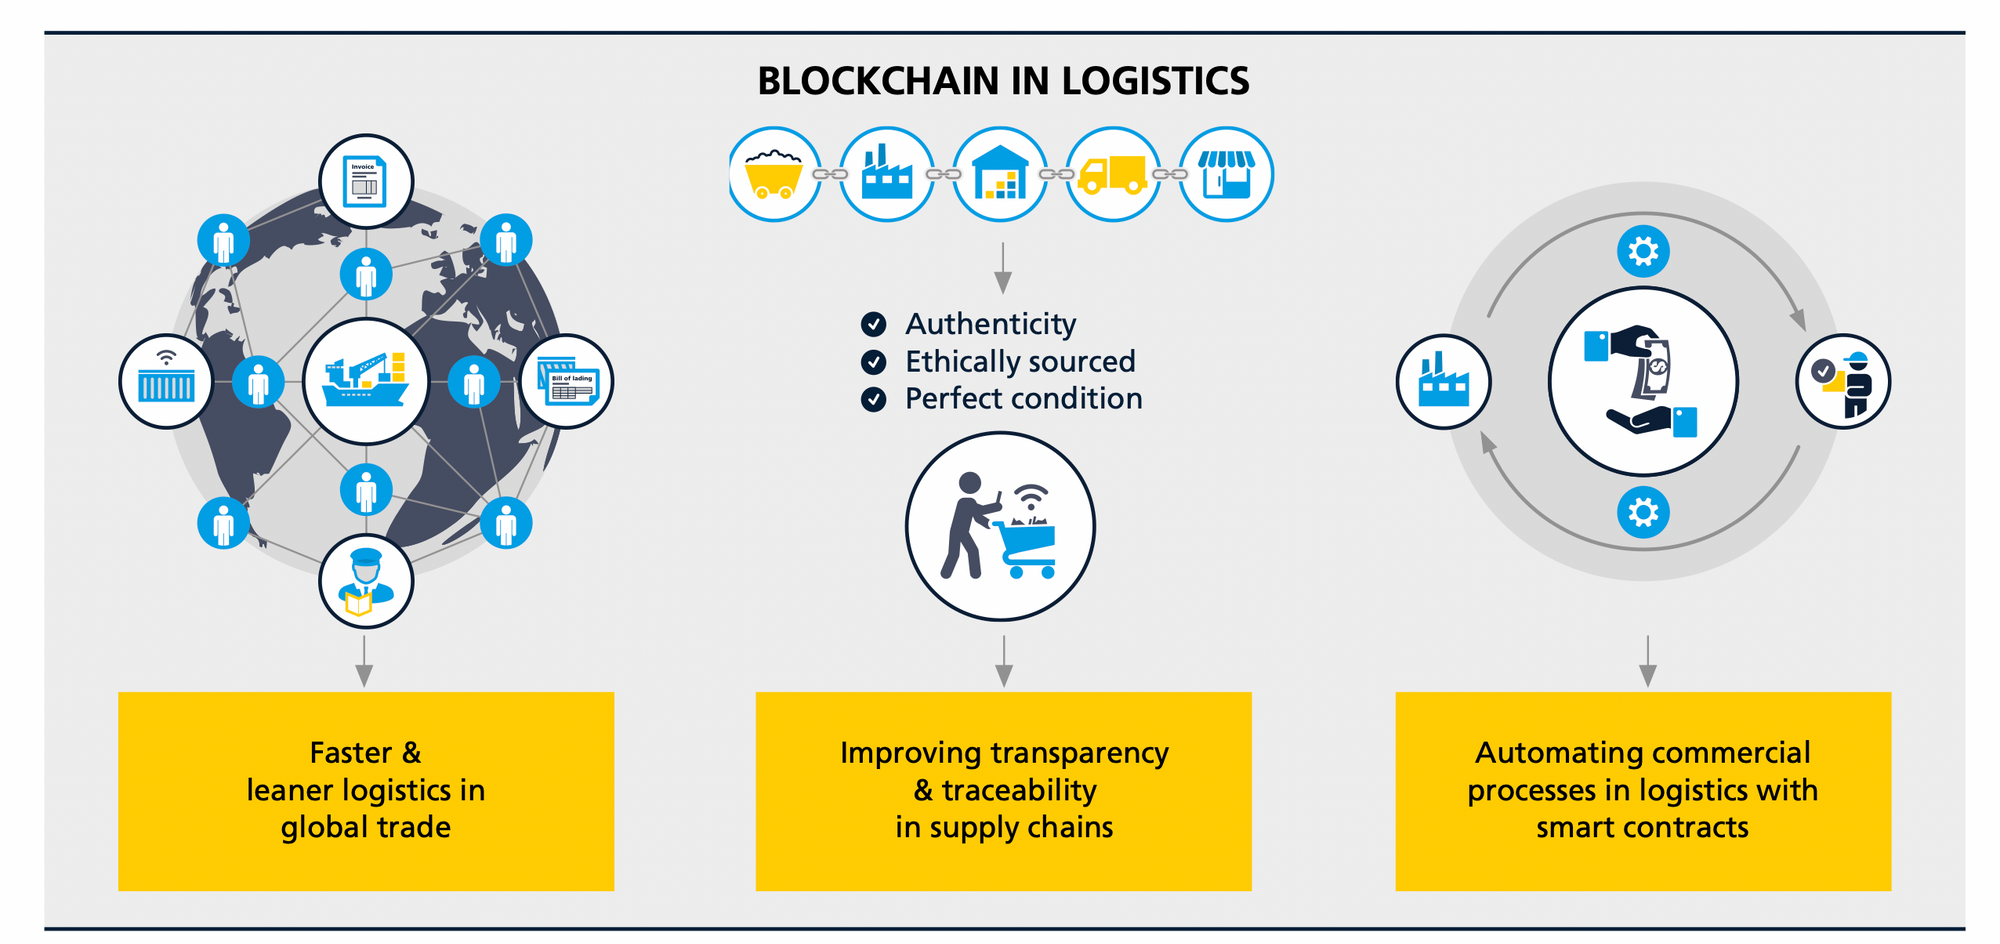 Key blockchain use cases in logistics. Source: Blockchain in logistics by DHL 